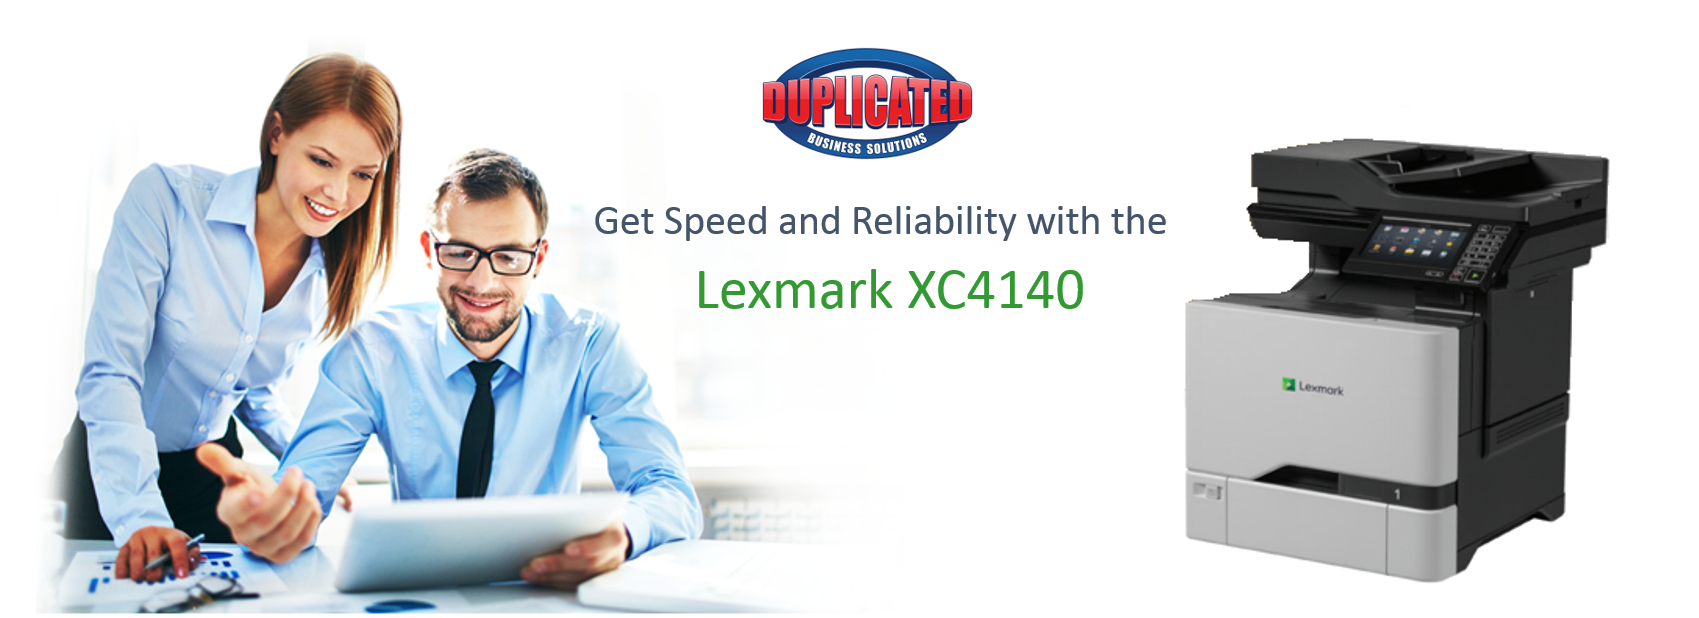 Duplicated Presents the Lexmark XC4140 Multi-Function Printer.png